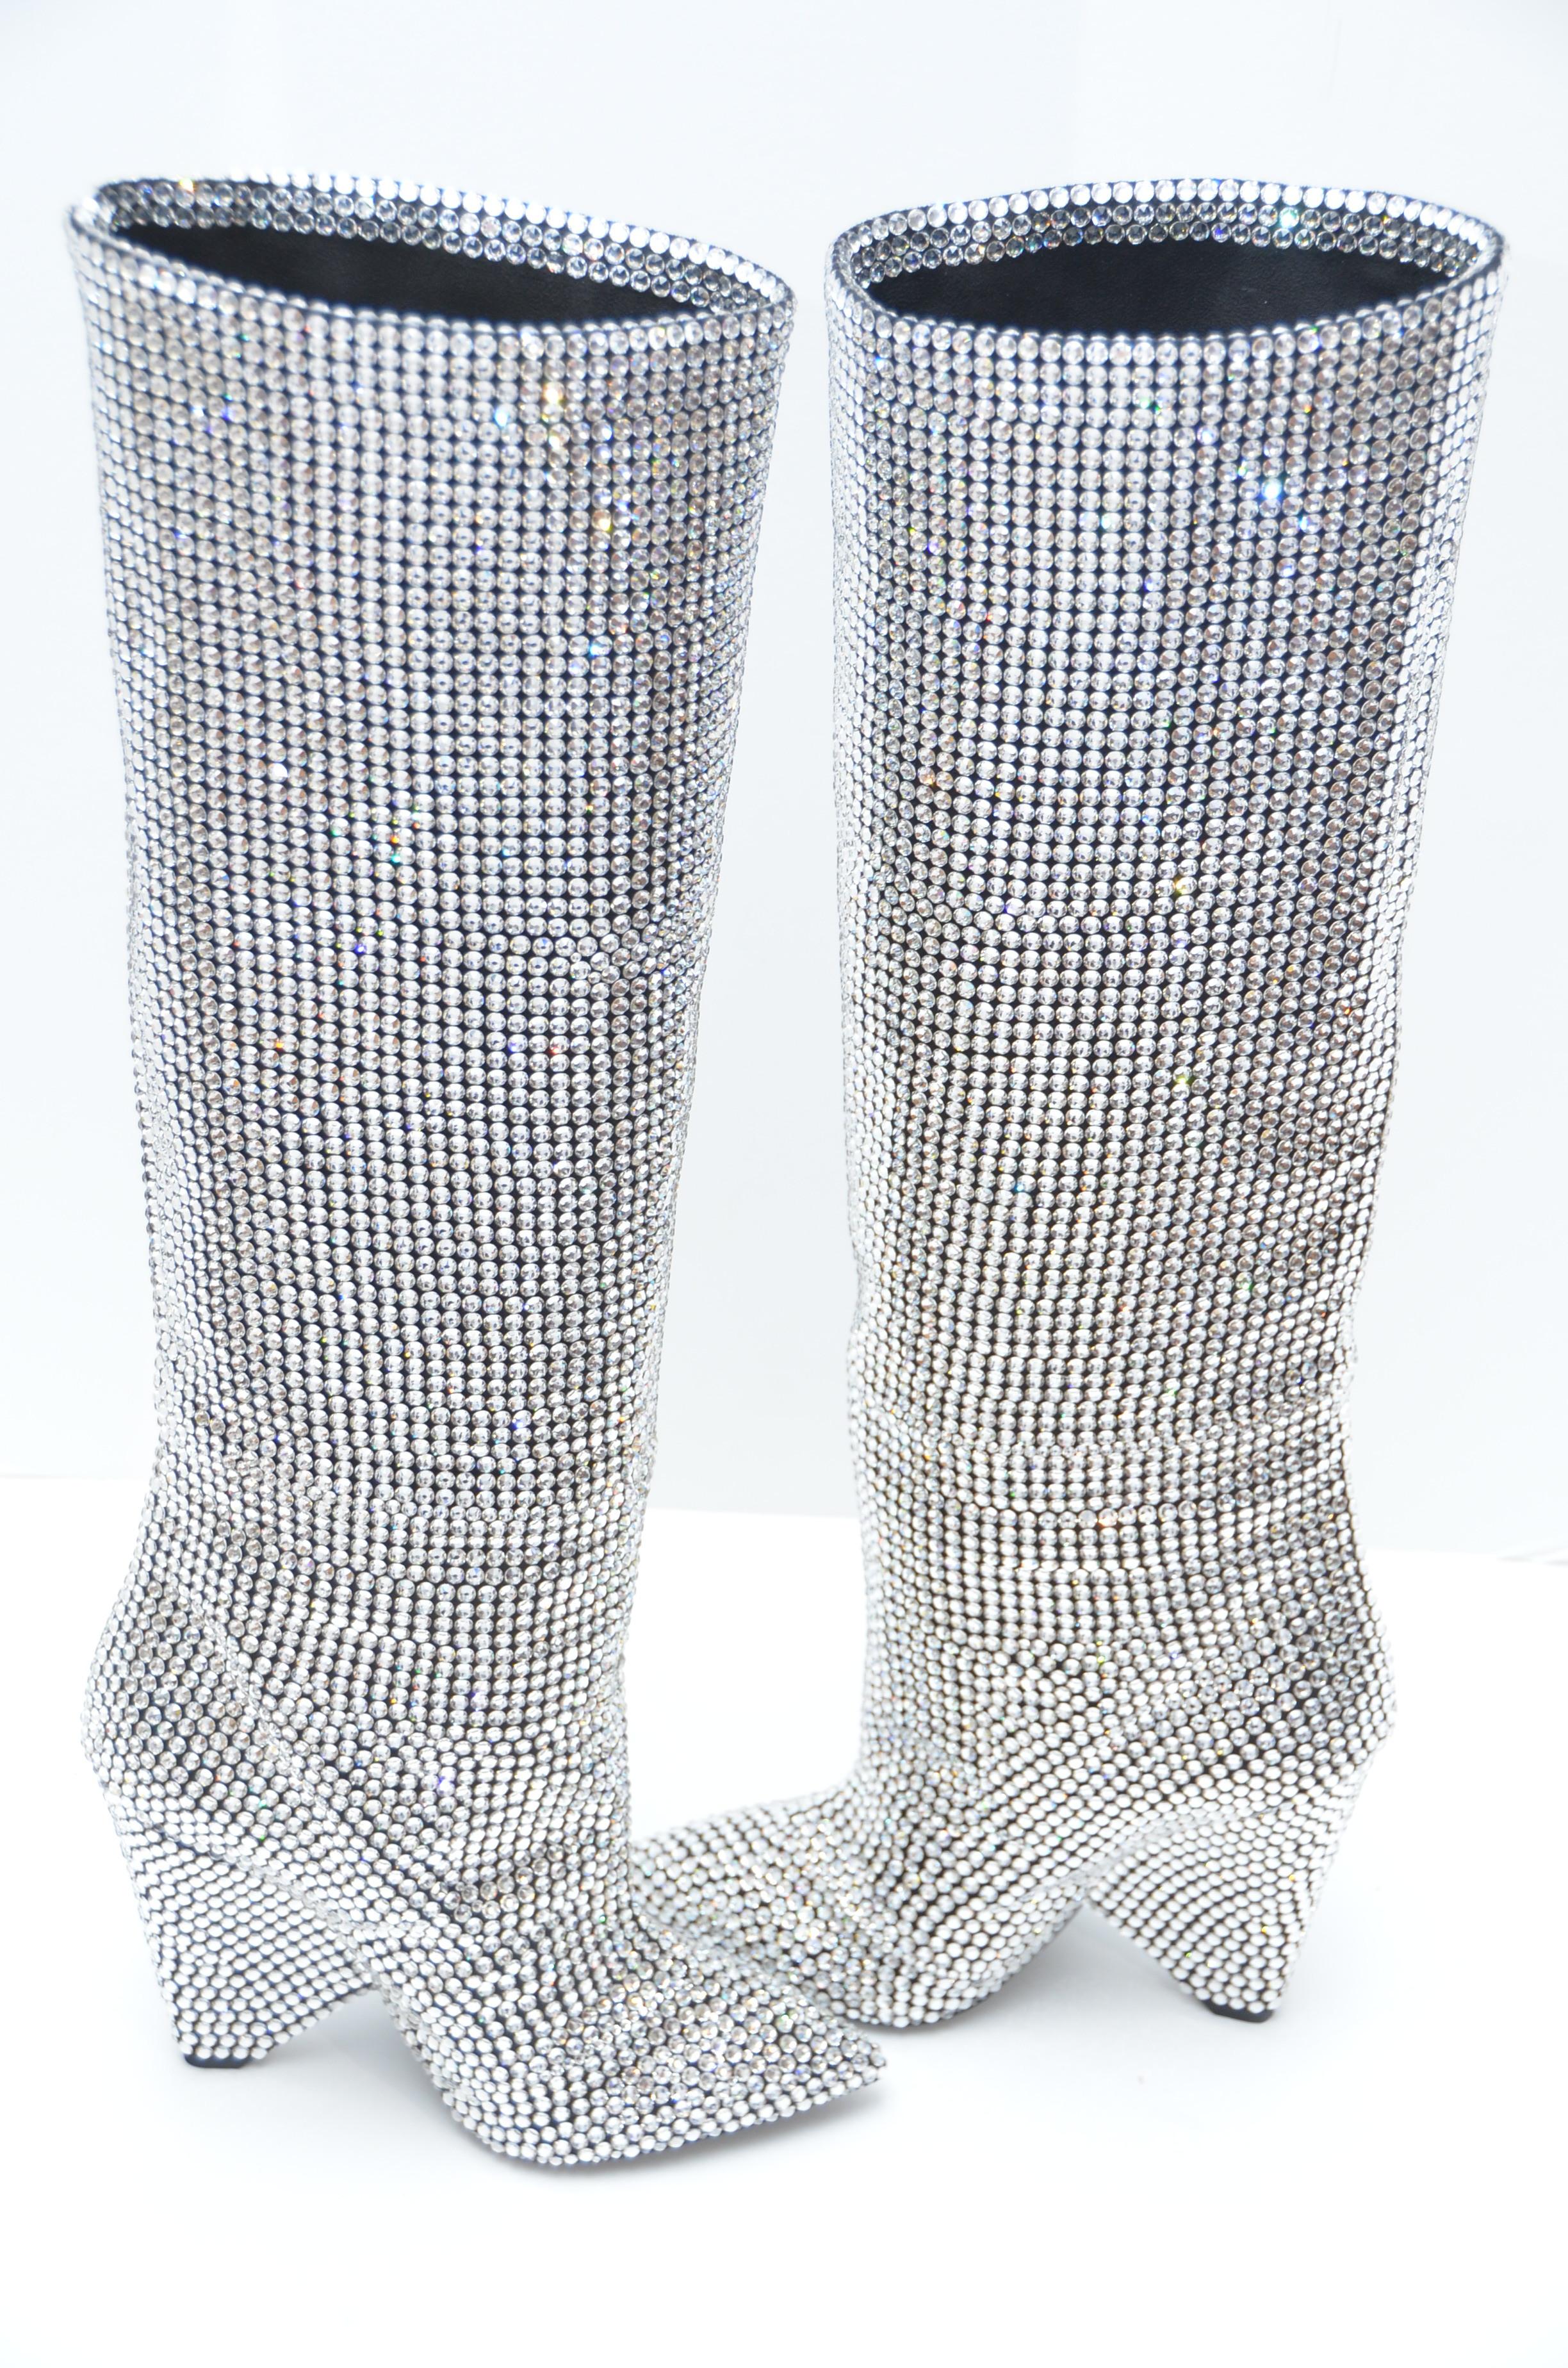 Saint Laurent Niki Crystals Embellished  Boots Retailed $10, 000  NEW W Box  39 5